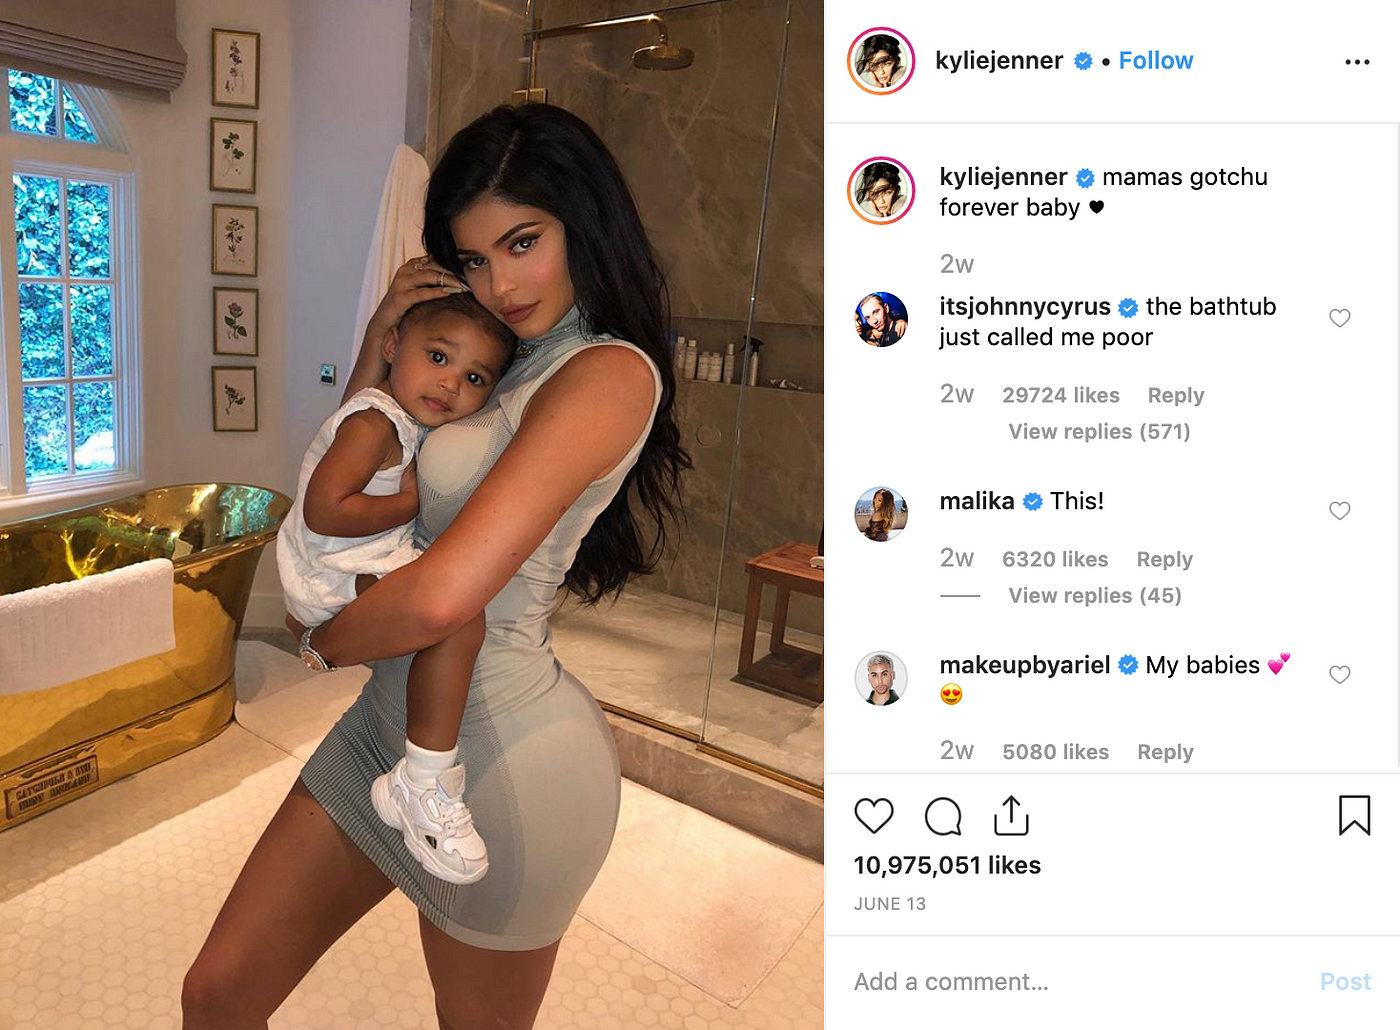 The most liked Instagram post of 2019 June is this one from Kylie Jenner.